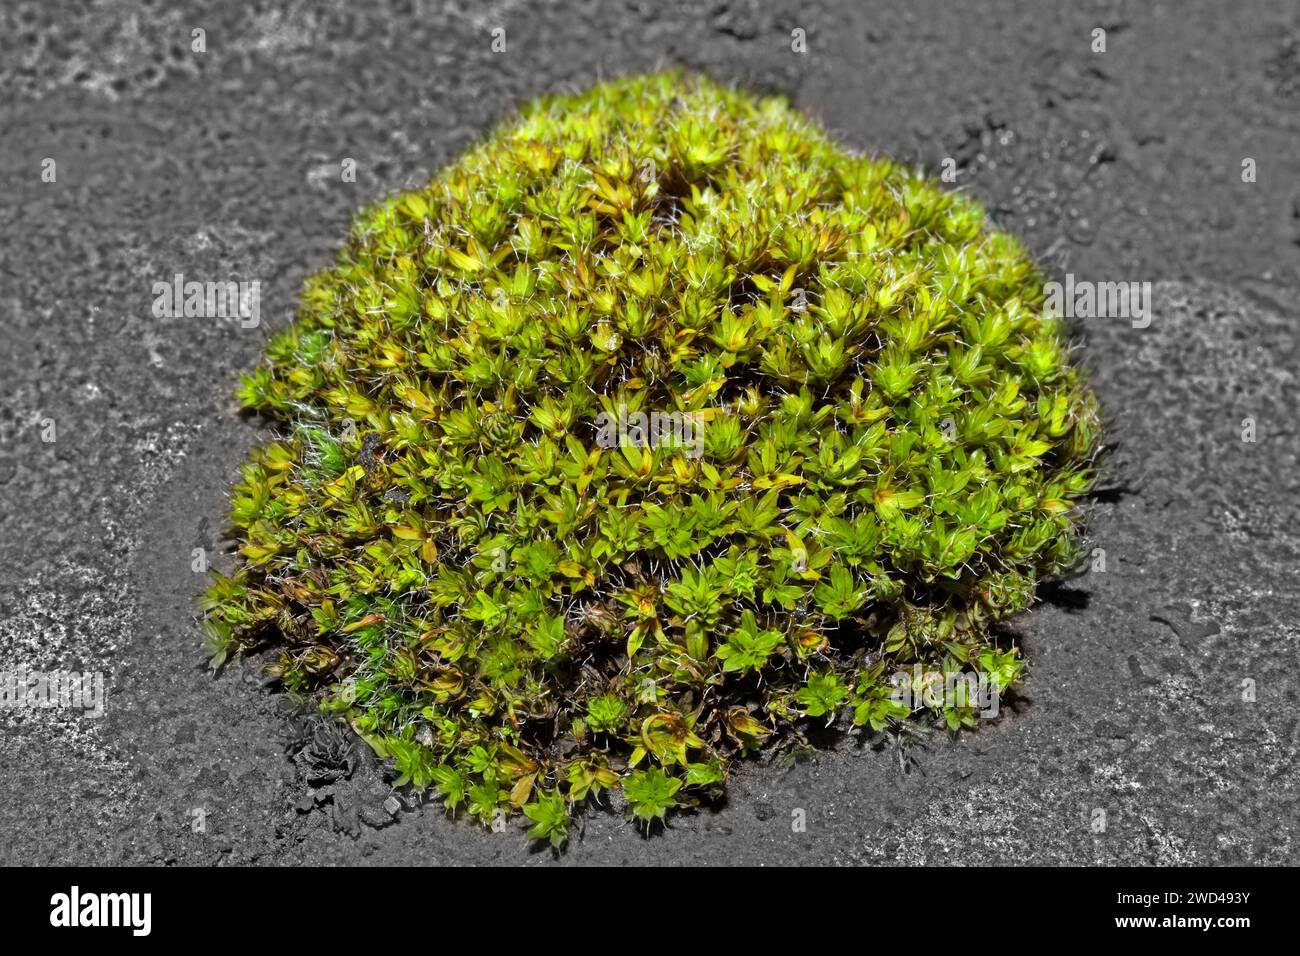 Syntrichia ruralis (star moss) grows on calcareous substrates on walls, rocks and sandy ground. It has a cosmopolitan distribution. Stock Photo